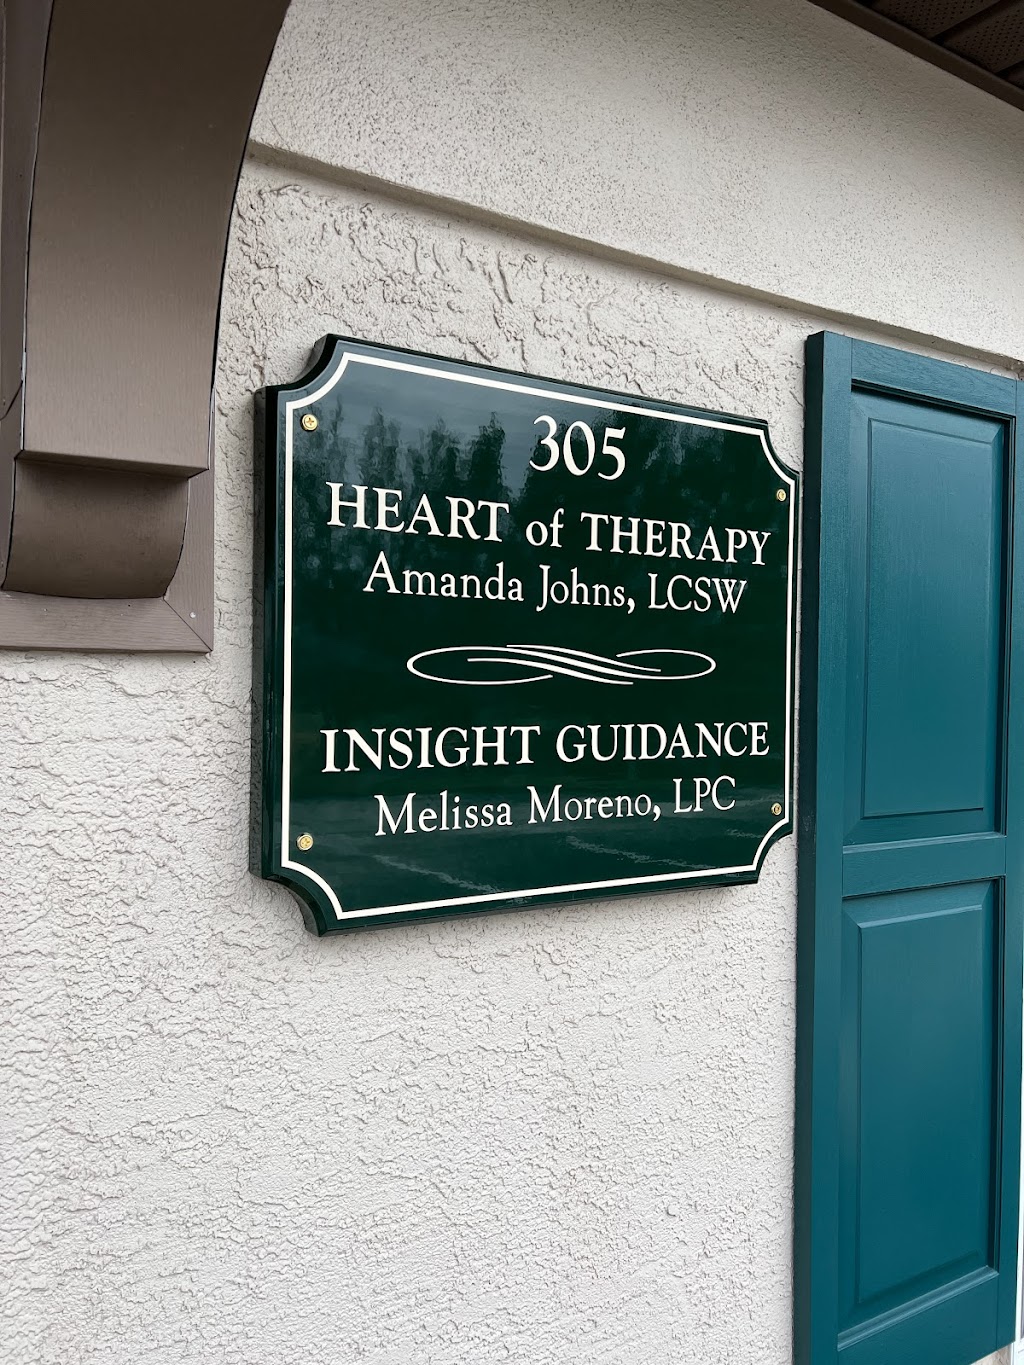 Heart of Therapy | 5049 Swamp Rd Suite 305, Fountainville, PA 18923 | Phone: (267) 261-2228